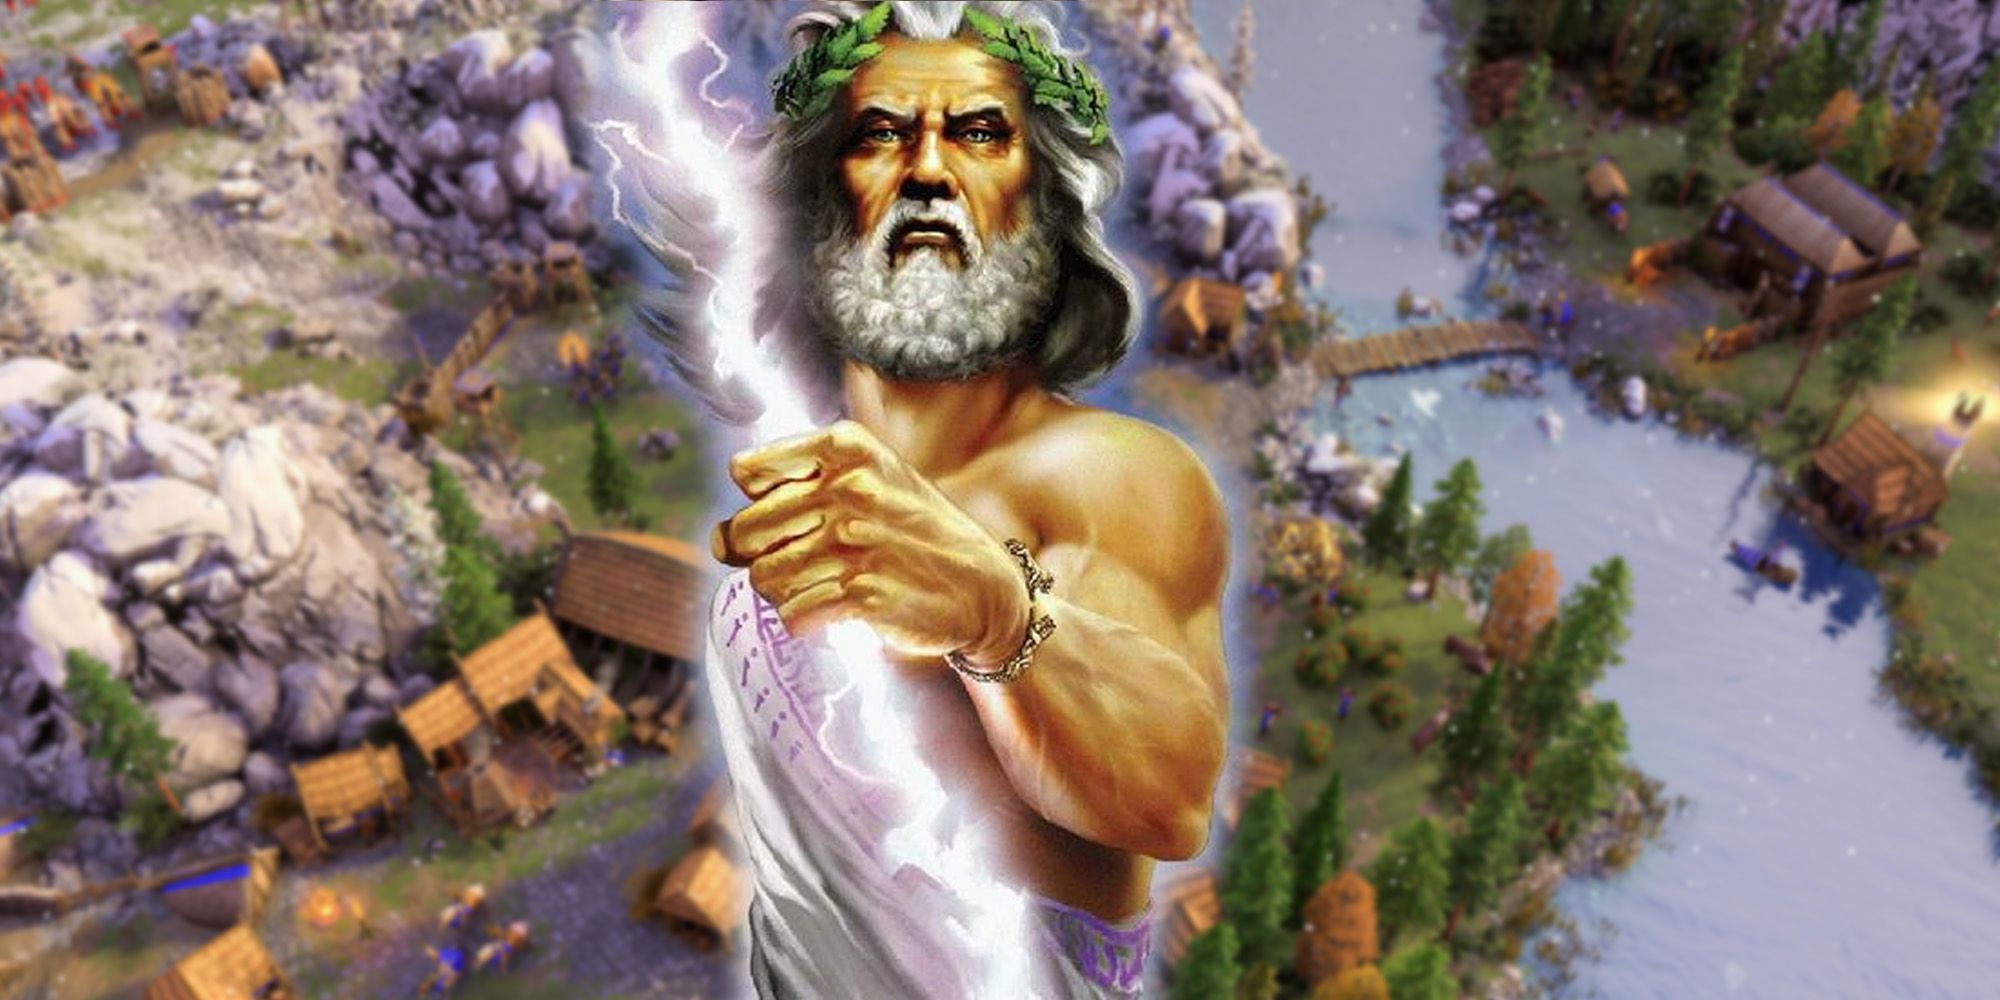 Art of Zeus from Age of Mythology in front of gameplay from Age of Mythology: Retold.